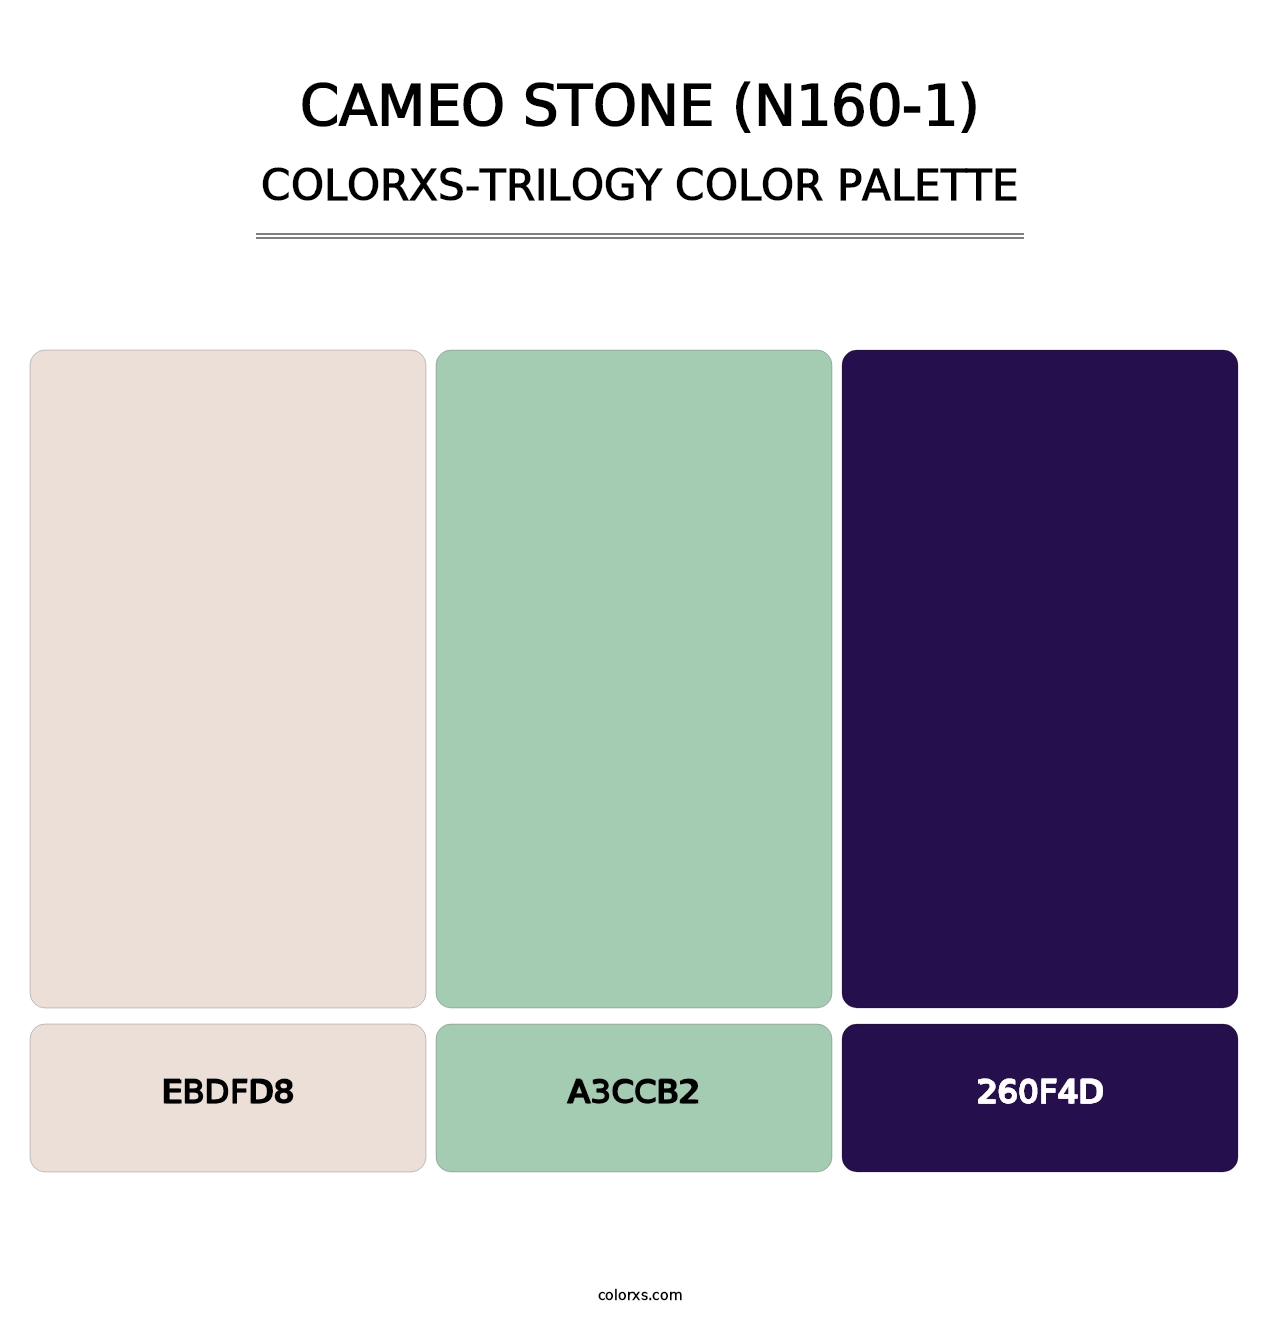 Cameo Stone (N160-1) - Colorxs Trilogy Palette